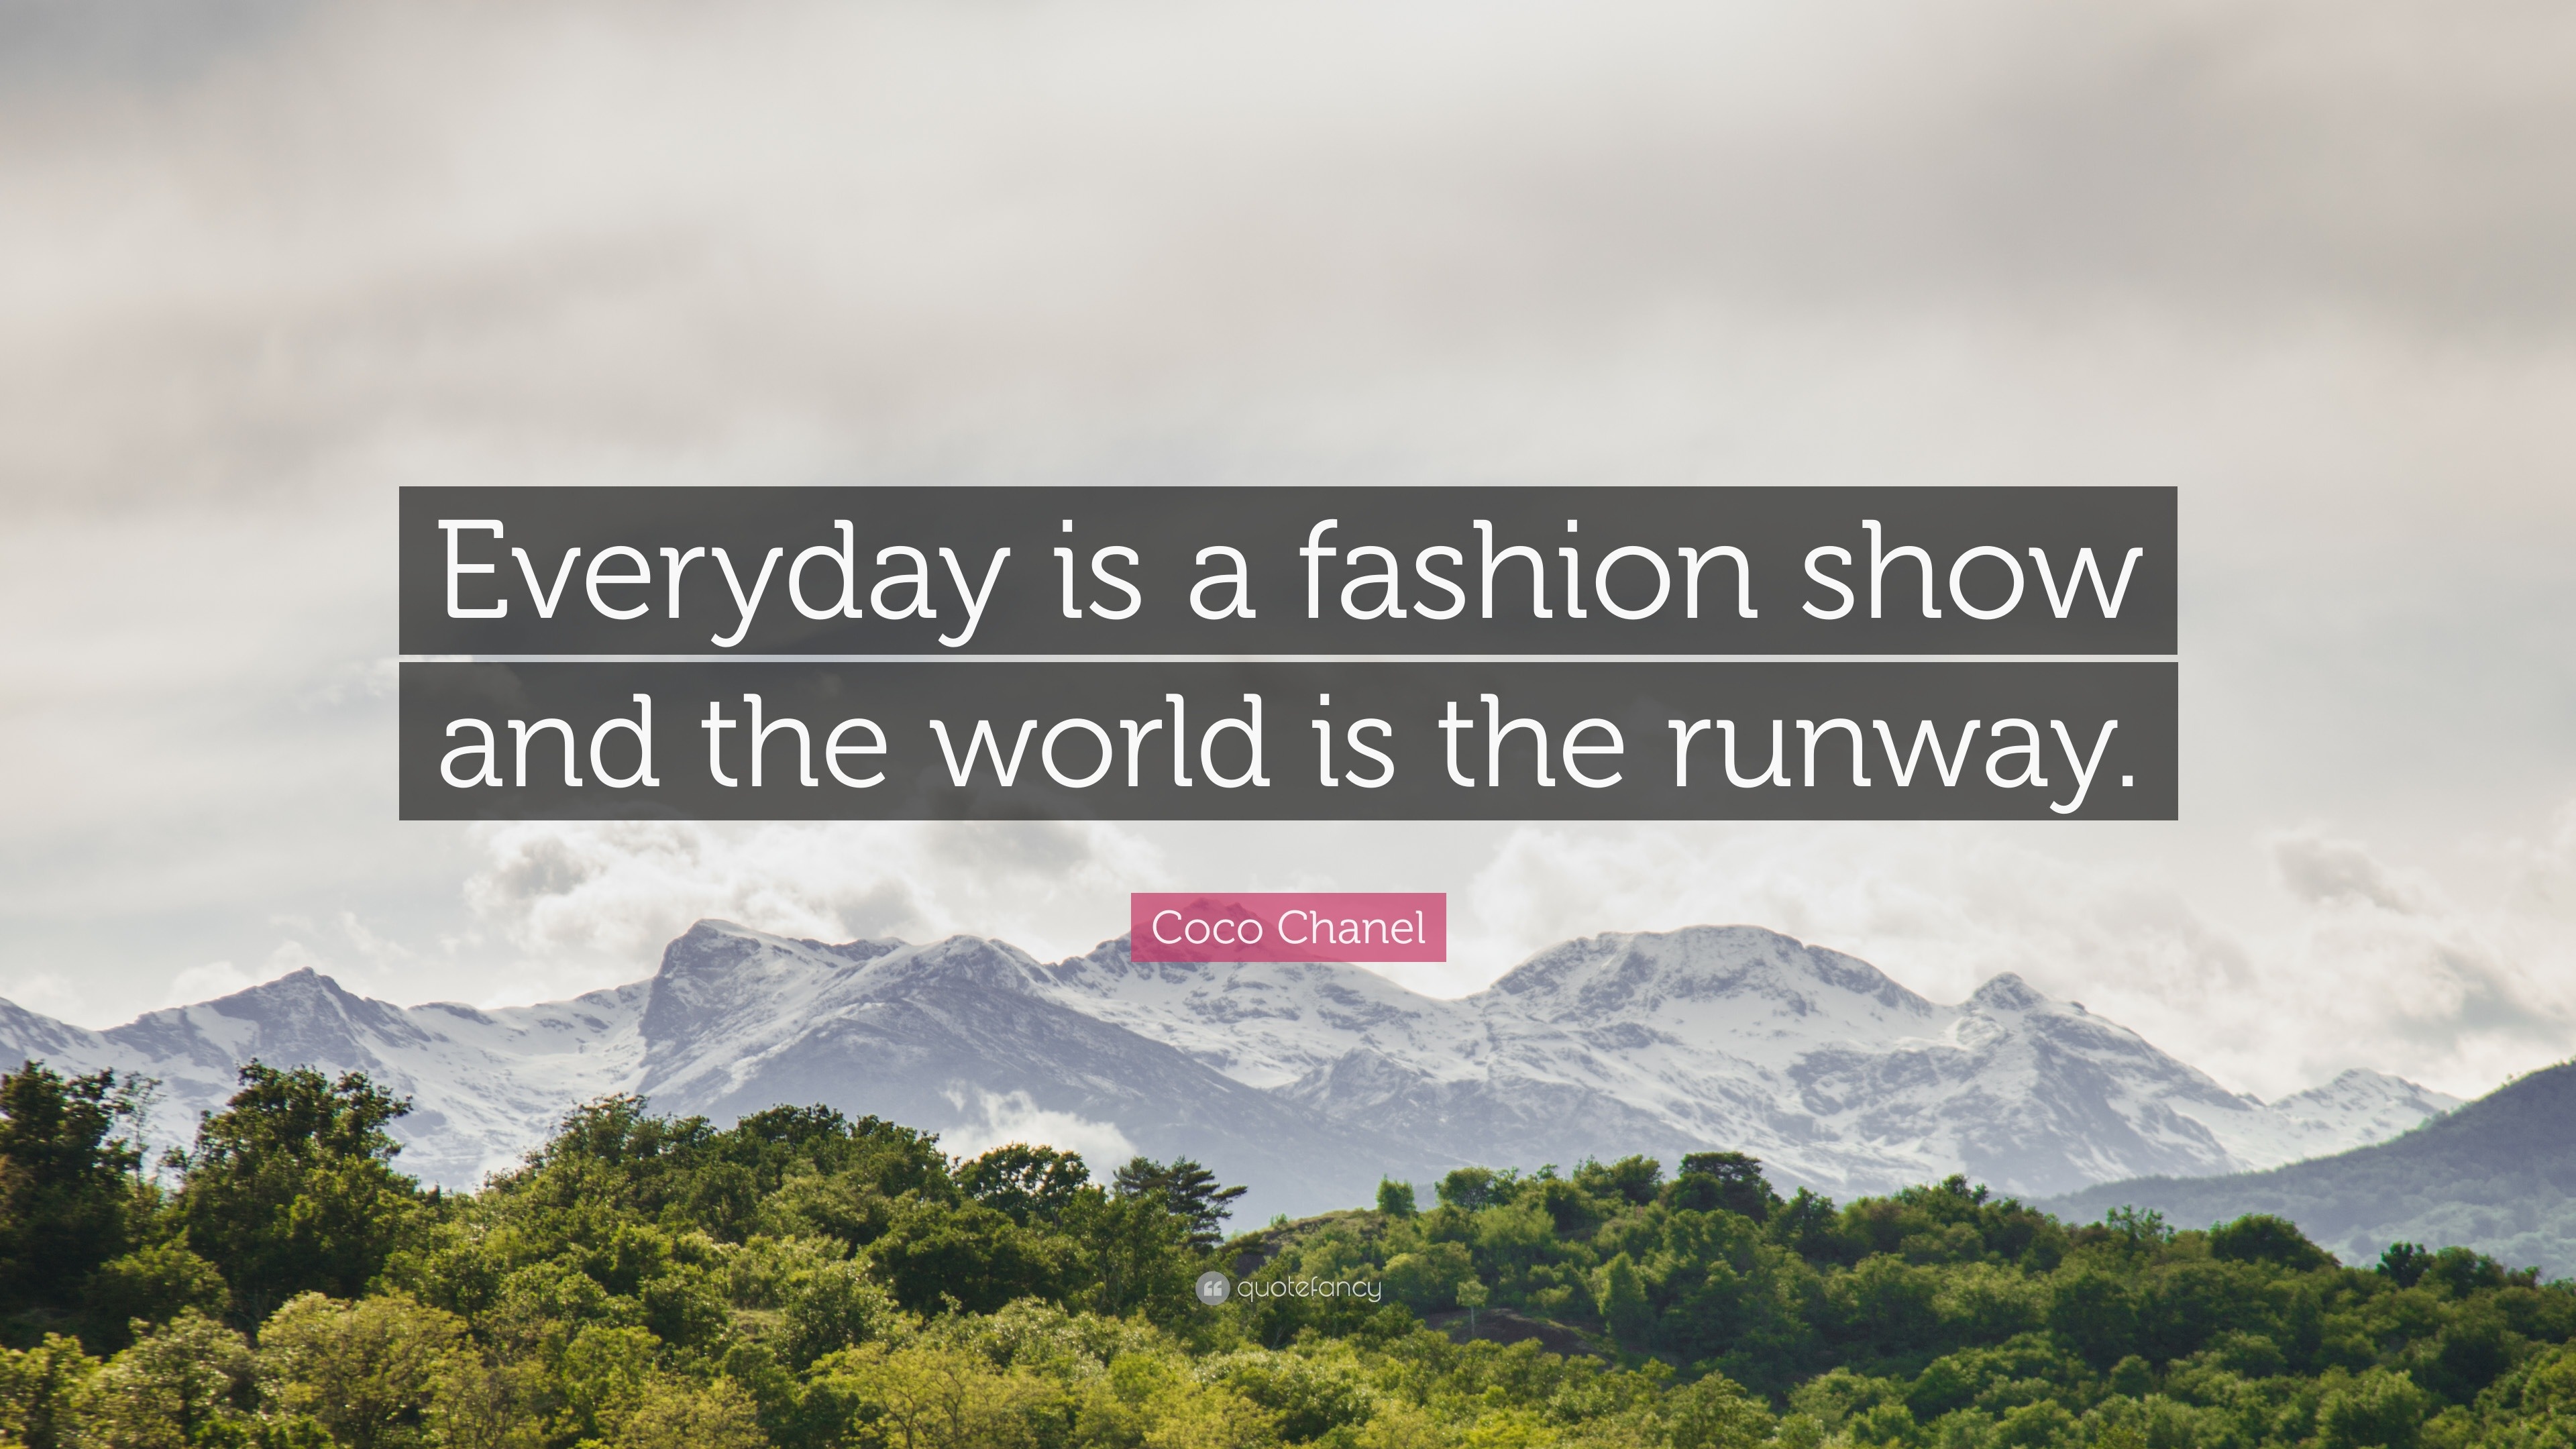 Coco Chanel Quote: “Everyday is a fashion show and the world is the runway.”